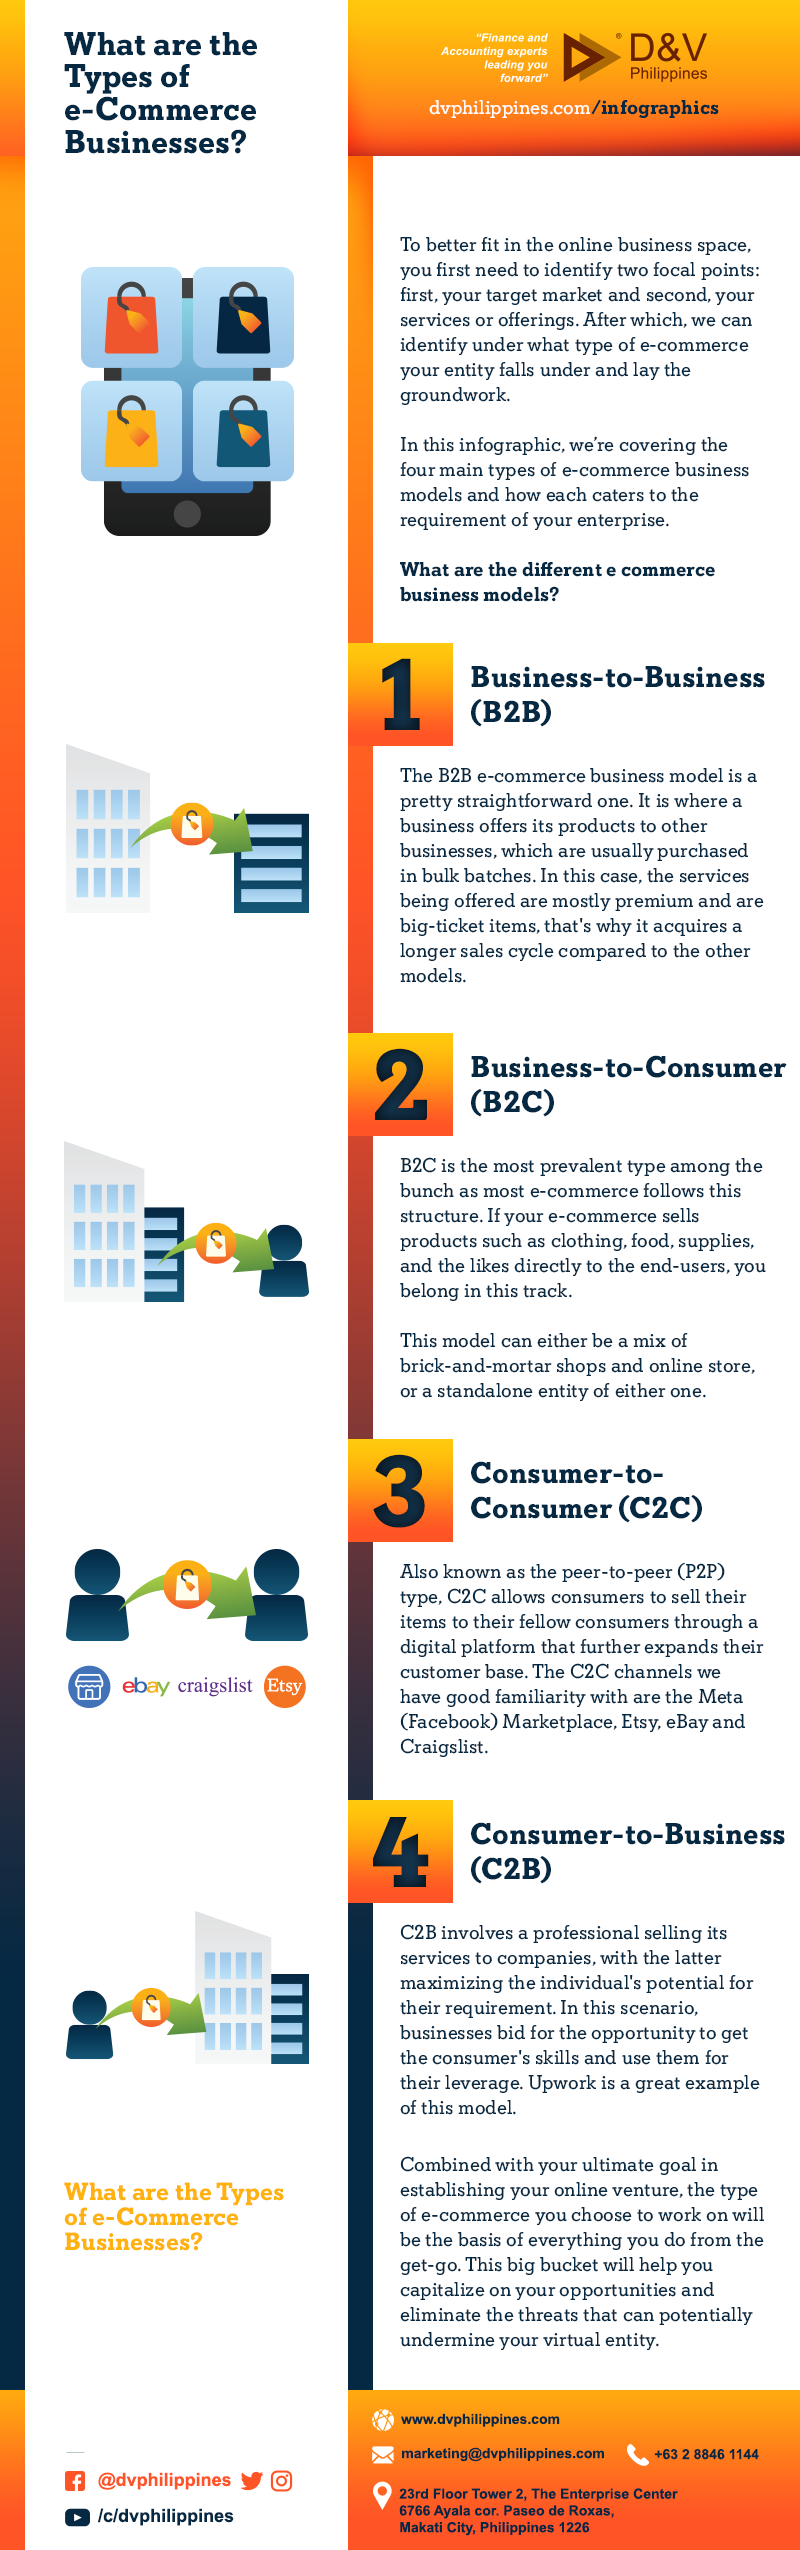 DV_Infog_Web_032322_What-are-the-Types-of-e-Commerce-Businesses_Content